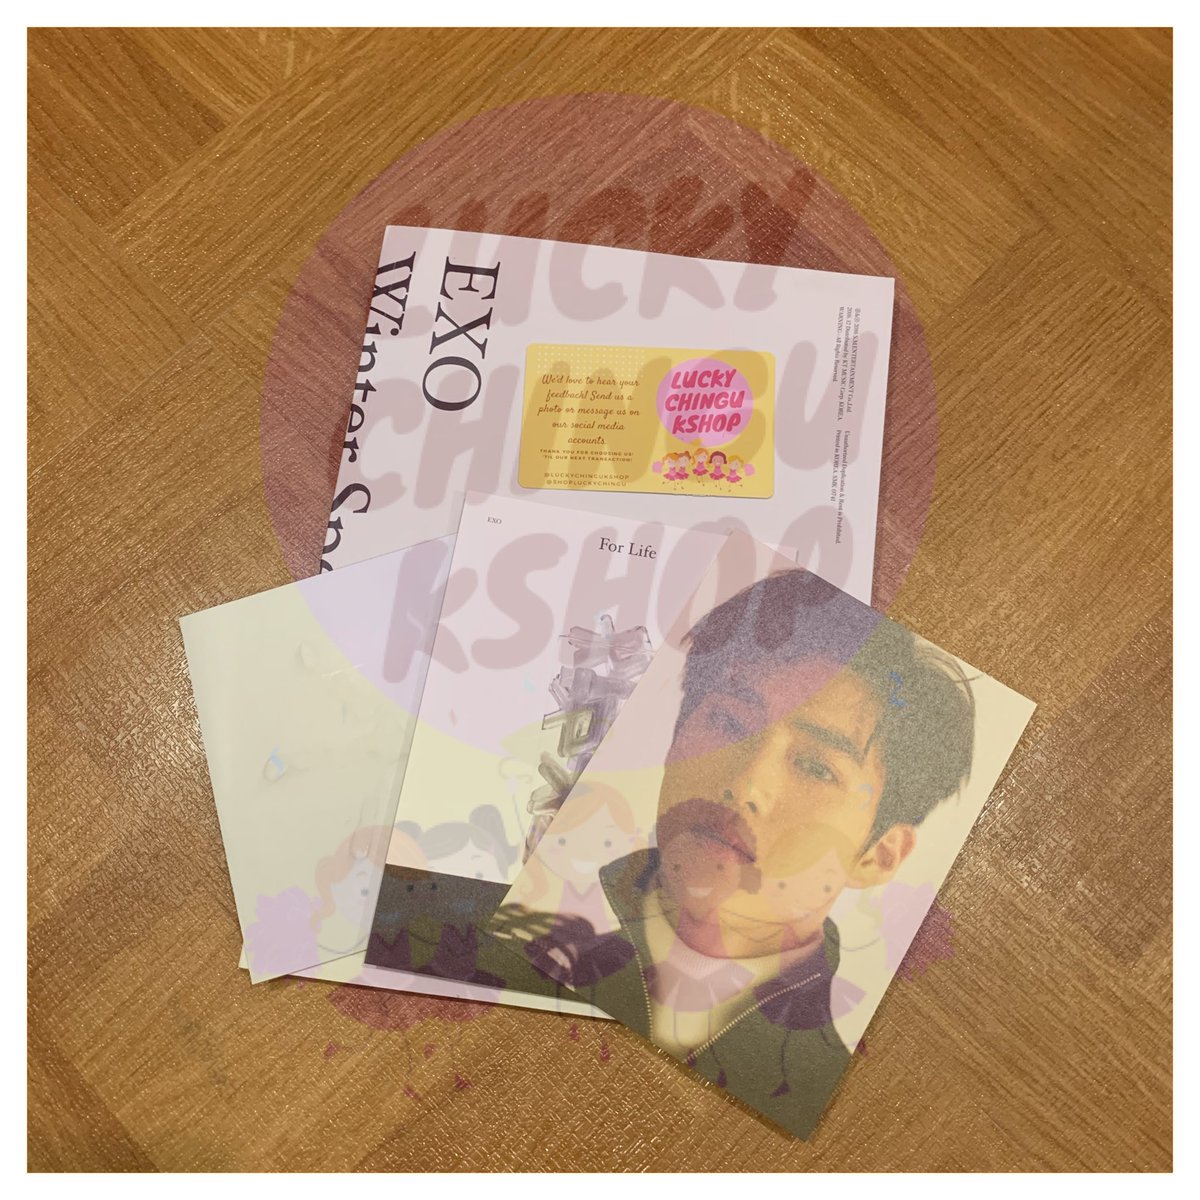  EXO - WINTER SPECIAL ALBUM [FOR LIFE] - P350.00INCLUSIONS : 2 CDs PHOTOBOOK POSTCARD (SUHO)